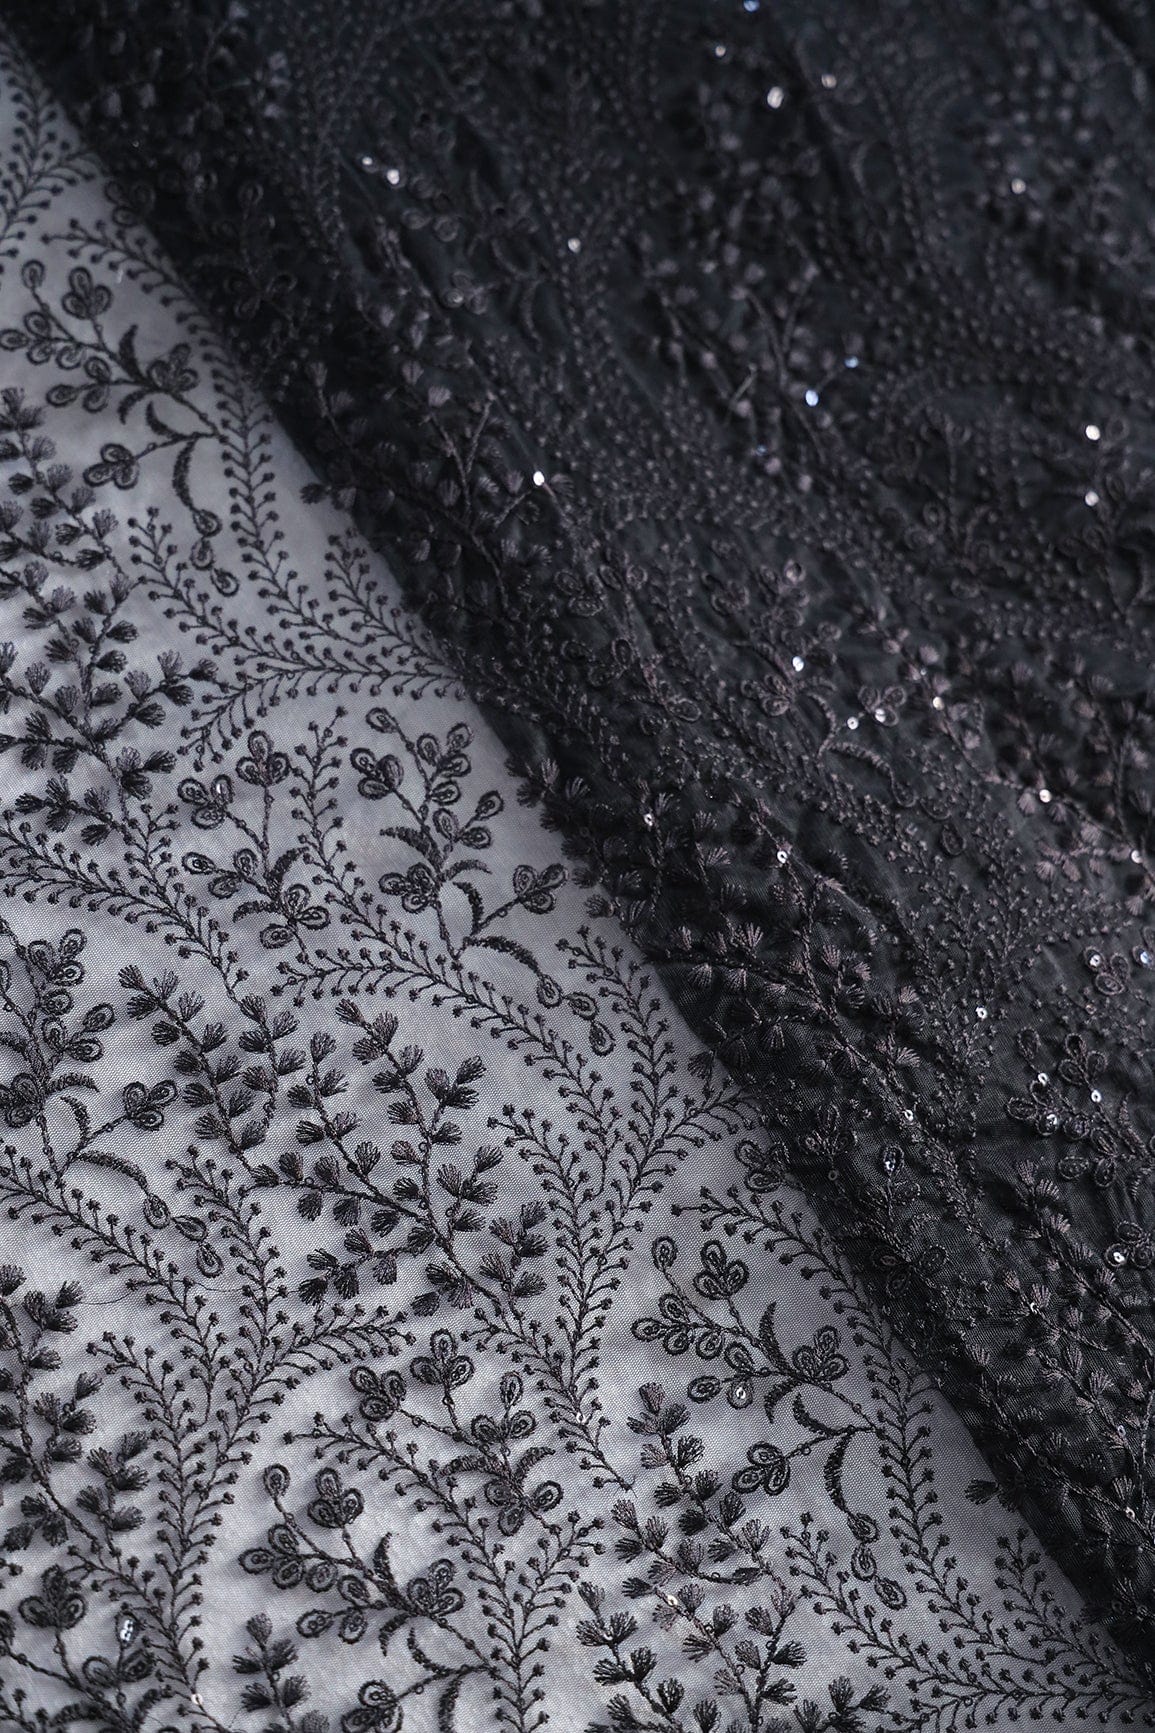 doeraa Embroidery Fabrics Beautiful Black Thread With Sequins Floral Embroidery Work On Black Soft Net Fabric With Border